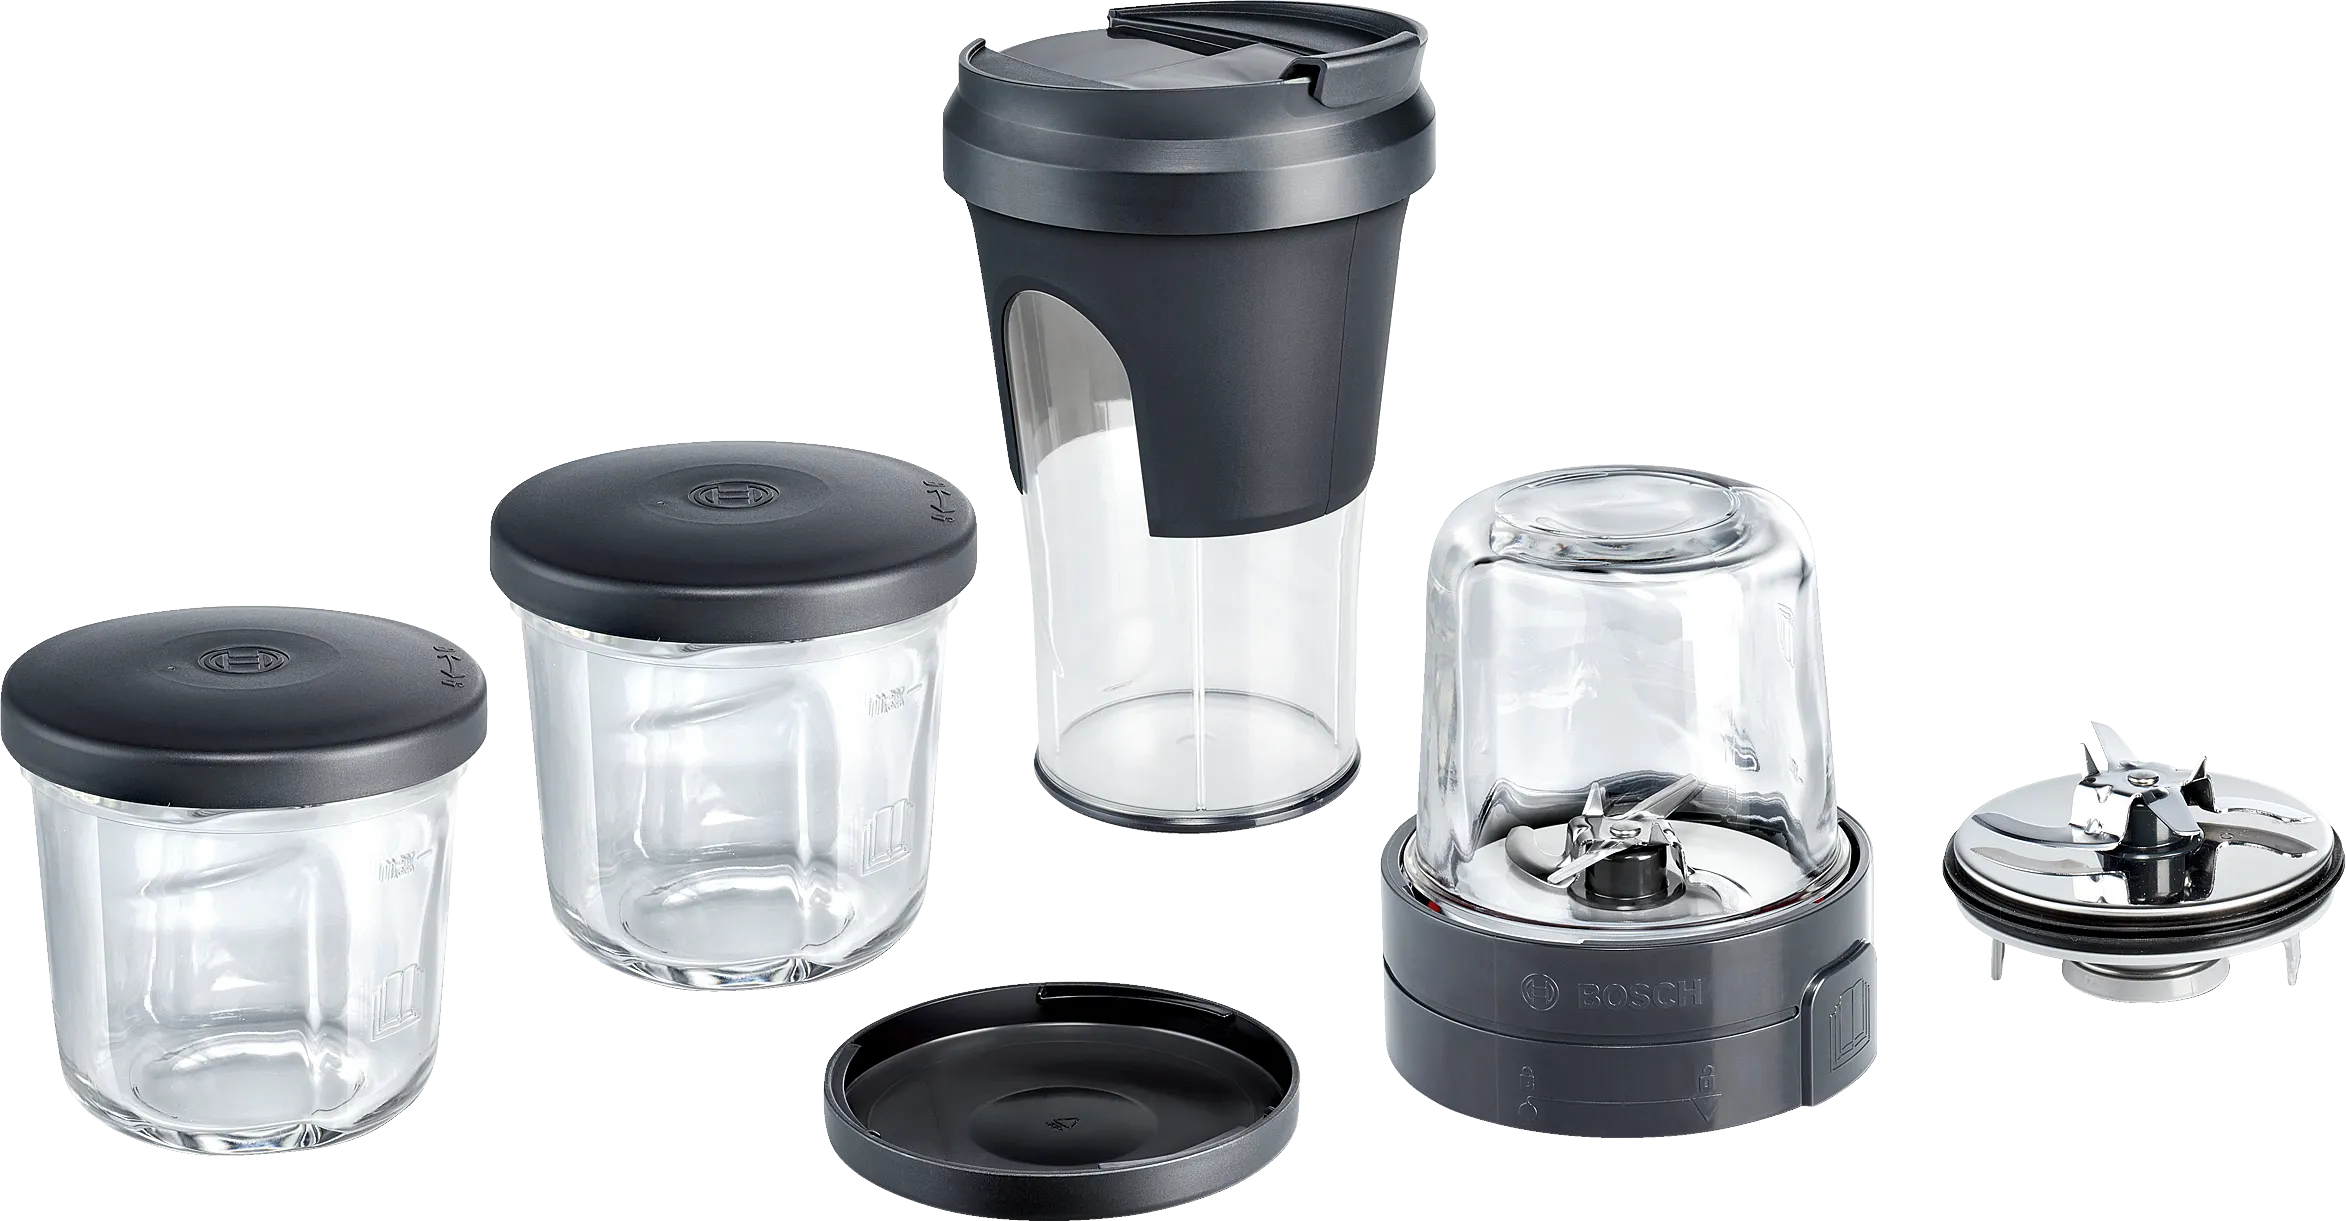 Universal cutter 3 x glass with storage lid, 1 x ToGo blender cup, 1 x chopping / 